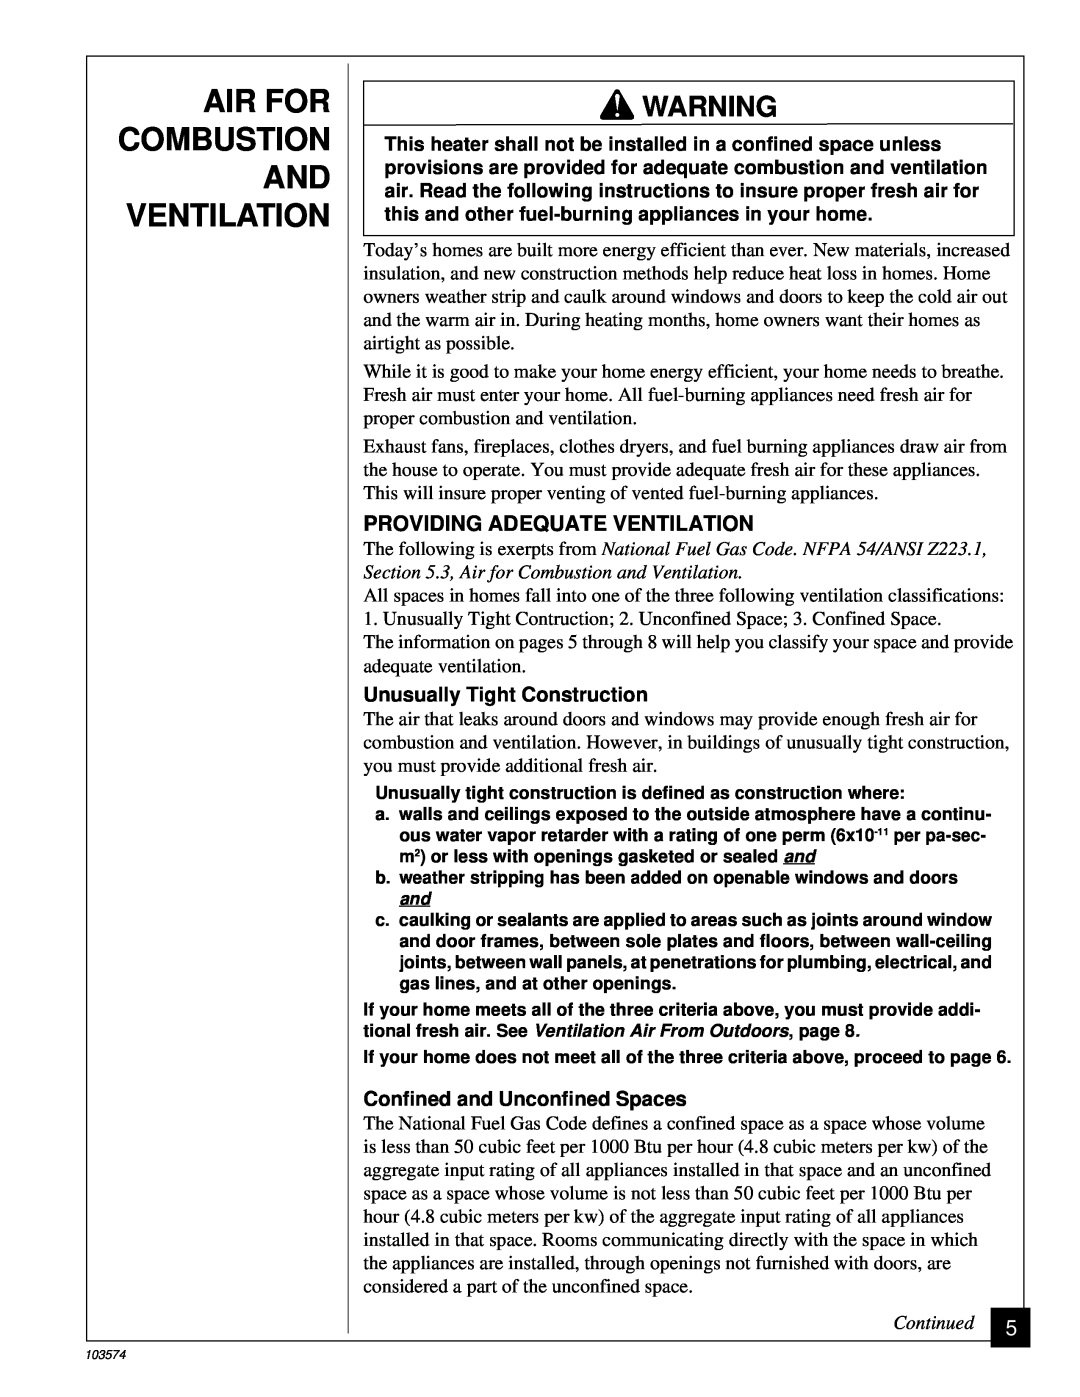 Desa Tech CGN10TL installation manual Air For Combustion And Ventilation, Providing Adequate Ventilation, Continued 